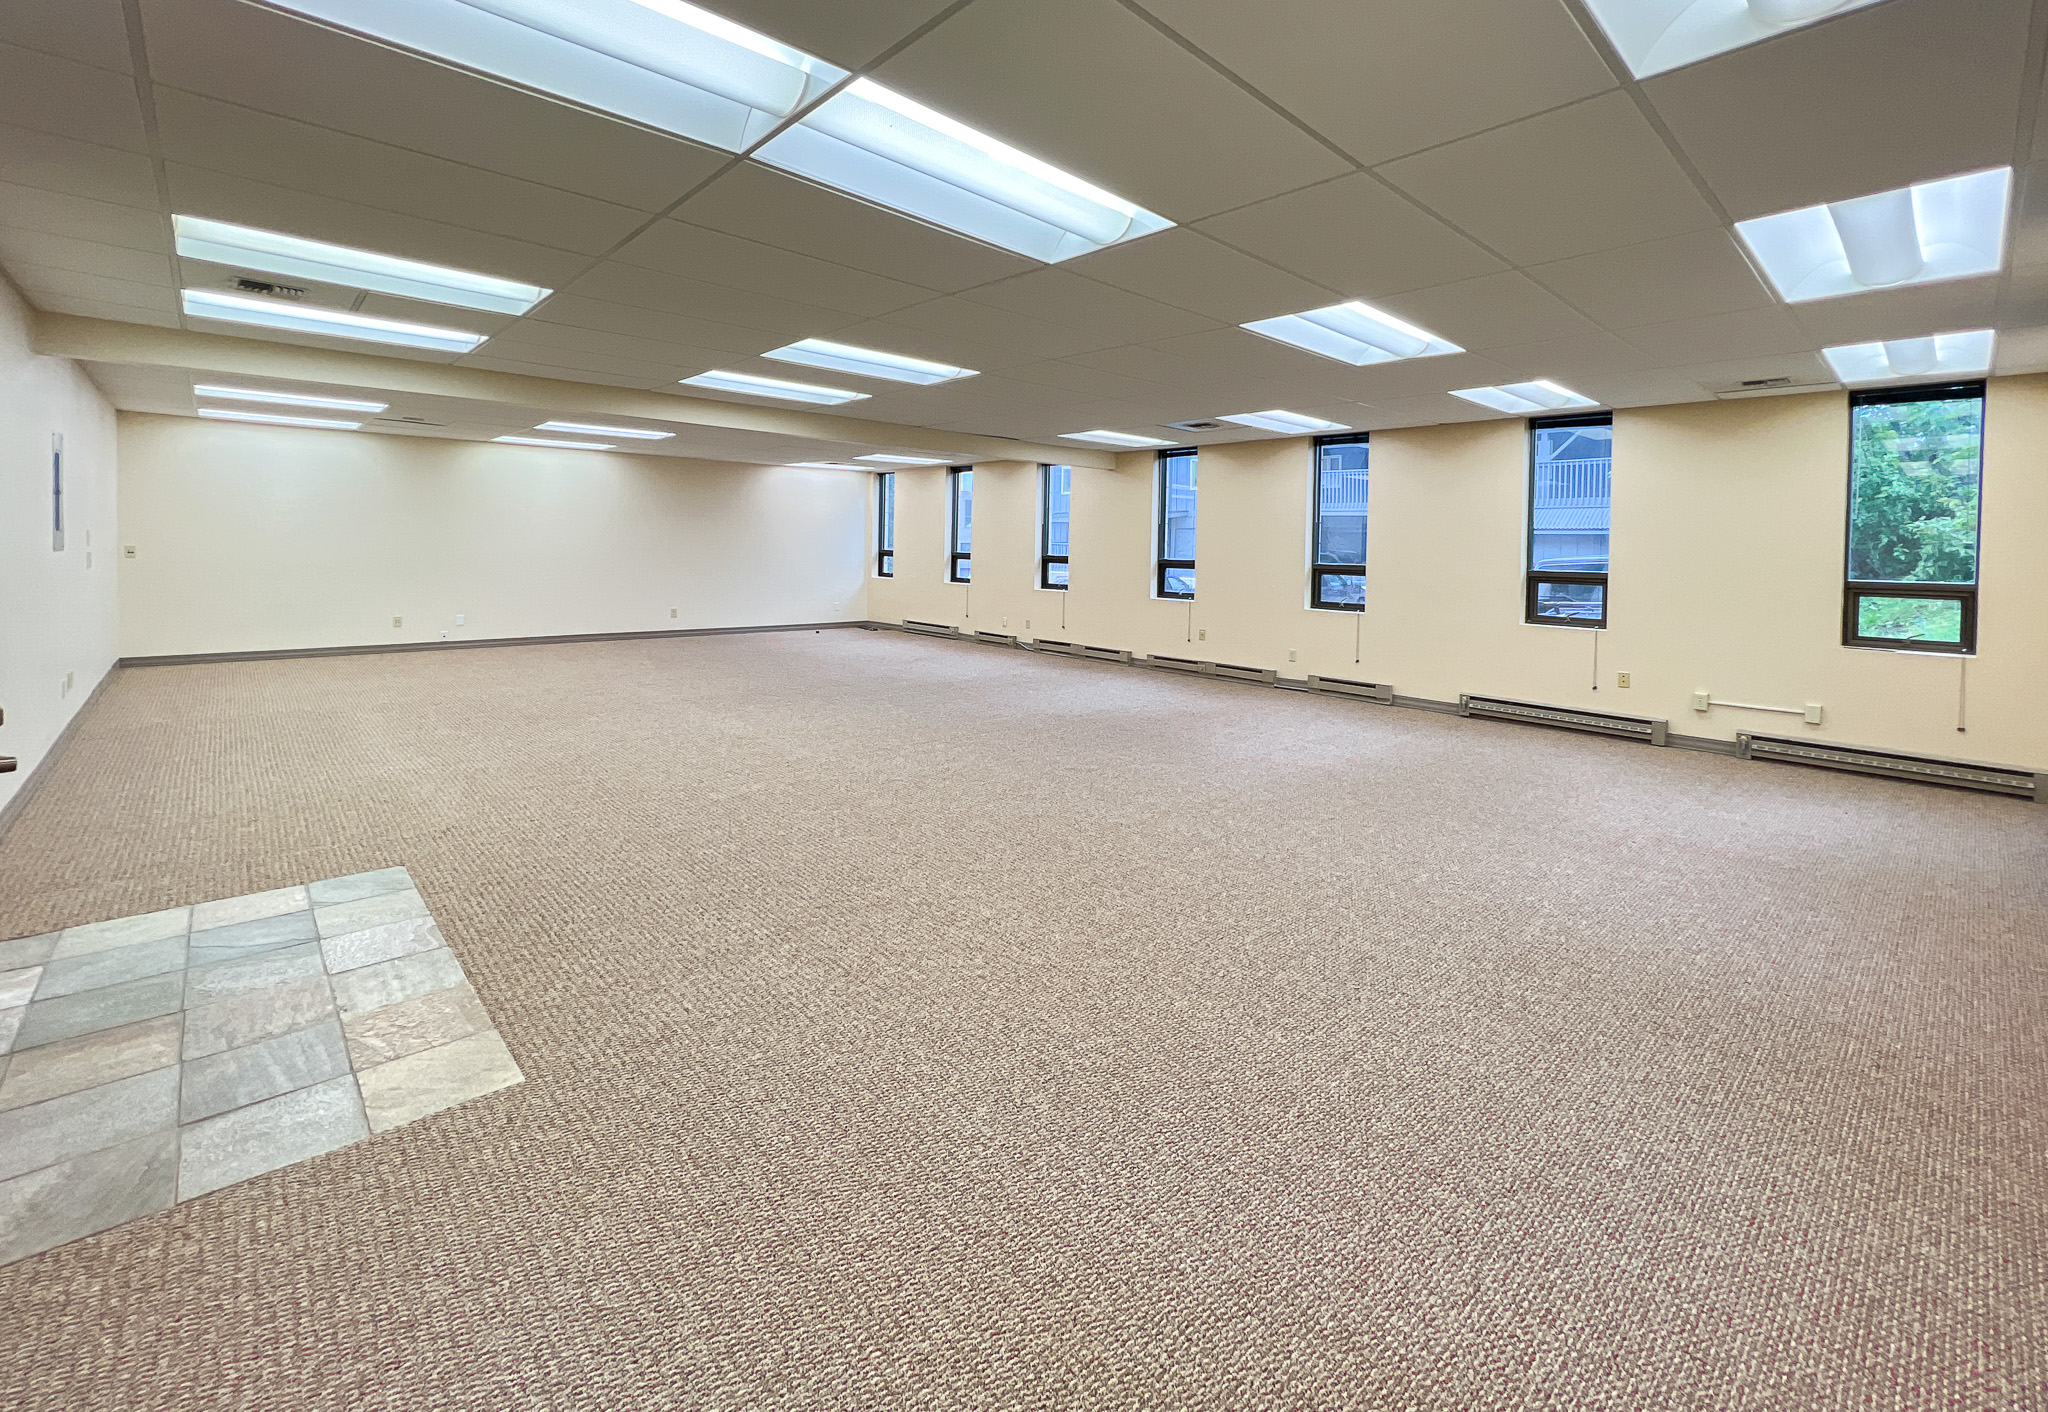 Interior of RSD Properties' Suite 102 in the 750 W 2nd Avenue office commercial office building in Anchorage, Alaska. Several windows on the right, tan carpeting and a drop ceiling